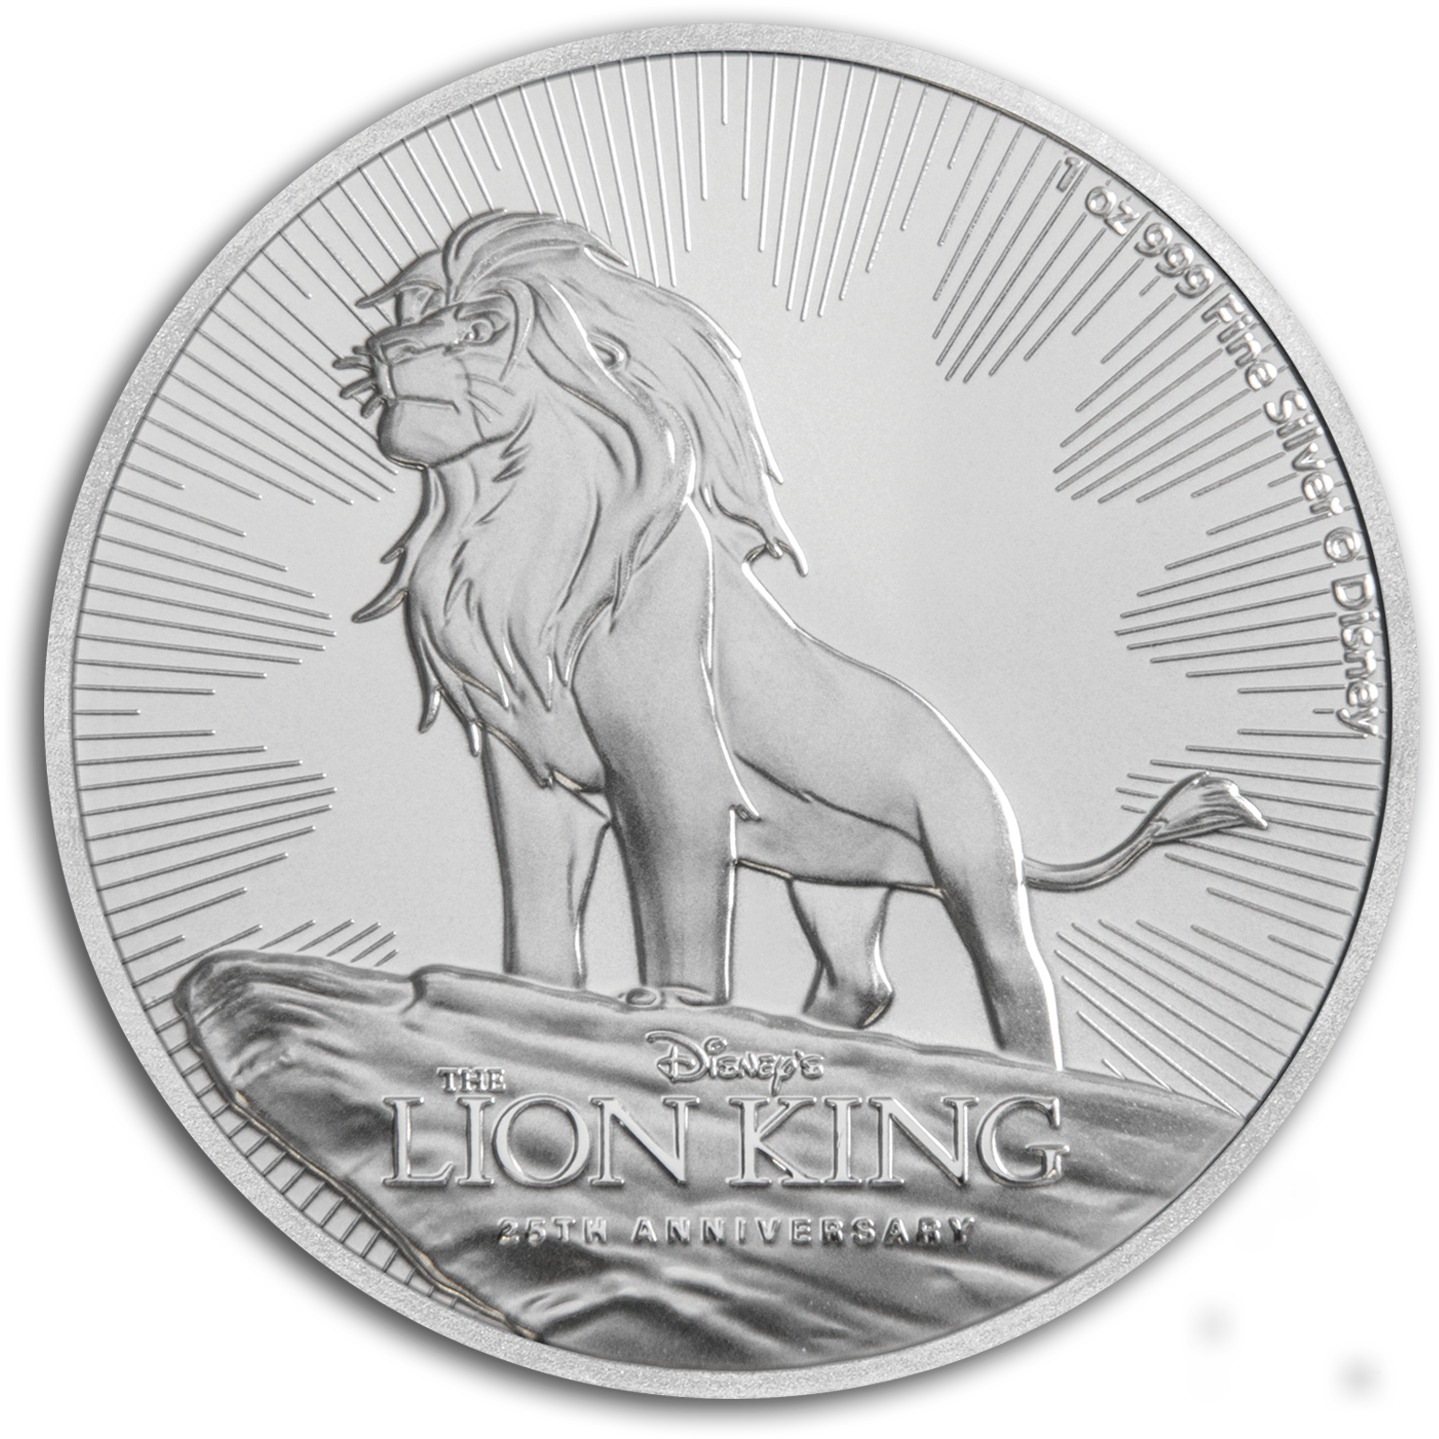 A Silver Coin With A Lion On It